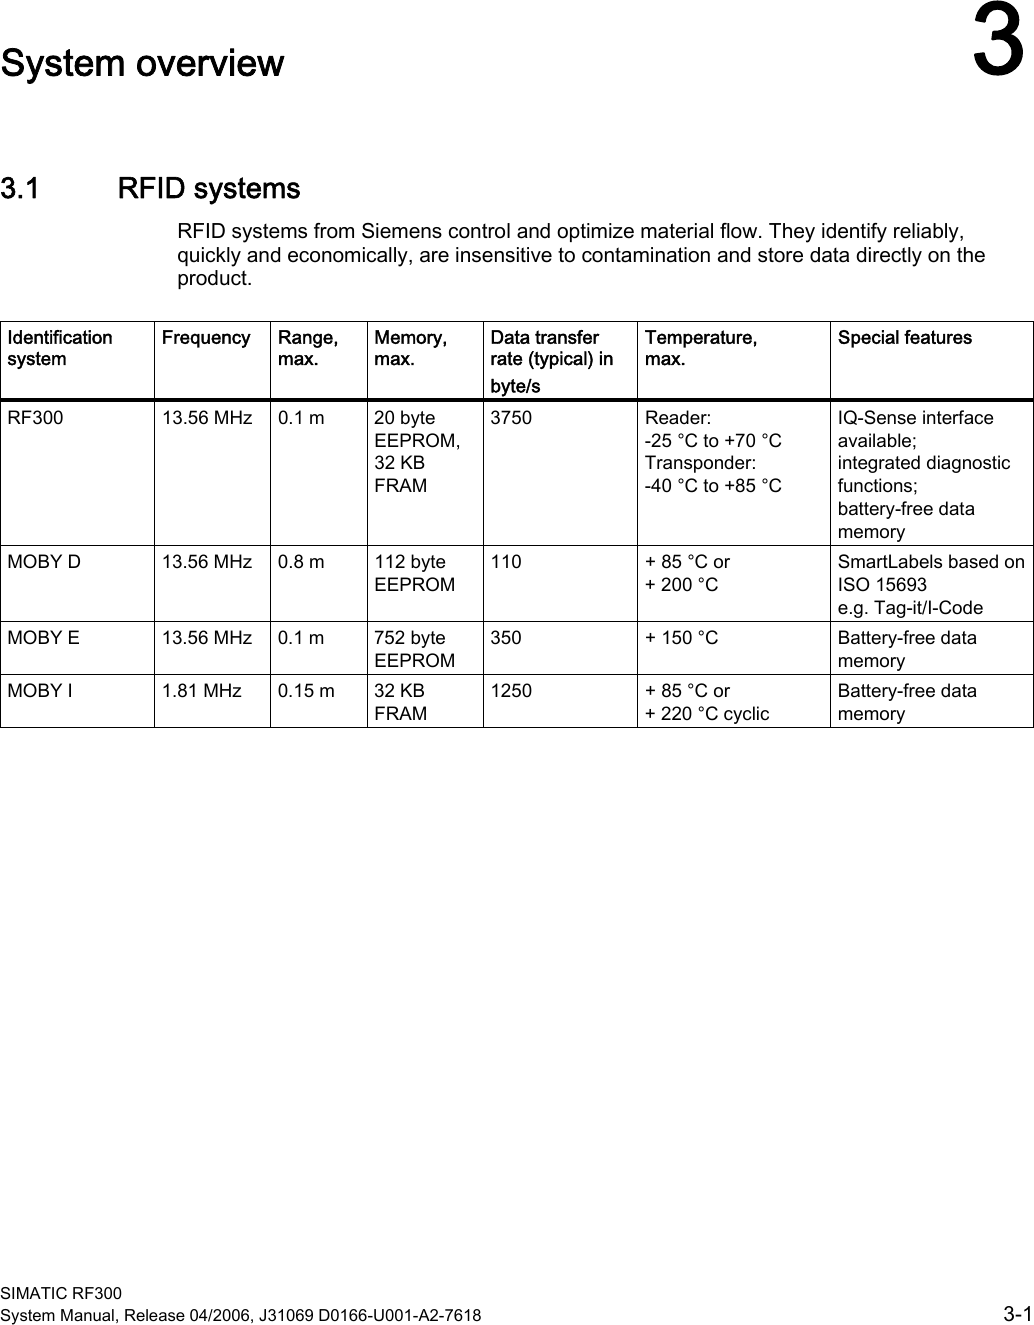  SIMATIC RF300 System Manual, Release 04/2006, J31069 D0166-U001-A2-7618  3-1 System overview  33.1 3.1 RFID systems RFID systems from Siemens control and optimize material flow. They identify reliably, quickly and economically, are insensitive to contamination and store data directly on the product.   Identification system Frequency  Range,  max. Memory,  max. Data transfer rate (typical) in byte/s Temperature,  max. Special features RF300  13.56 MHz  0.1 m  20 byte EEPROM, 32 KB FRAM  3750  Reader:  -25 °C to +70 °C Transponder:  -40 °C to +85 °C IQ-Sense interface available; integrated diagnostic functions; battery-free data memory MOBY D  13.56 MHz  0.8 m  112 byte EEPROM 110  + 85 °C or  + 200 °C SmartLabels based on ISO 15693  e.g. Tag-it/I-Code MOBY E  13.56 MHz  0.1 m  752 byte EEPROM 350  + 150 °C  Battery-free data memory MOBY I  1.81 MHz  0.15 m  32 KB FRAM 1250  + 85 °C or  + 220 °C cyclic Battery-free data memory  